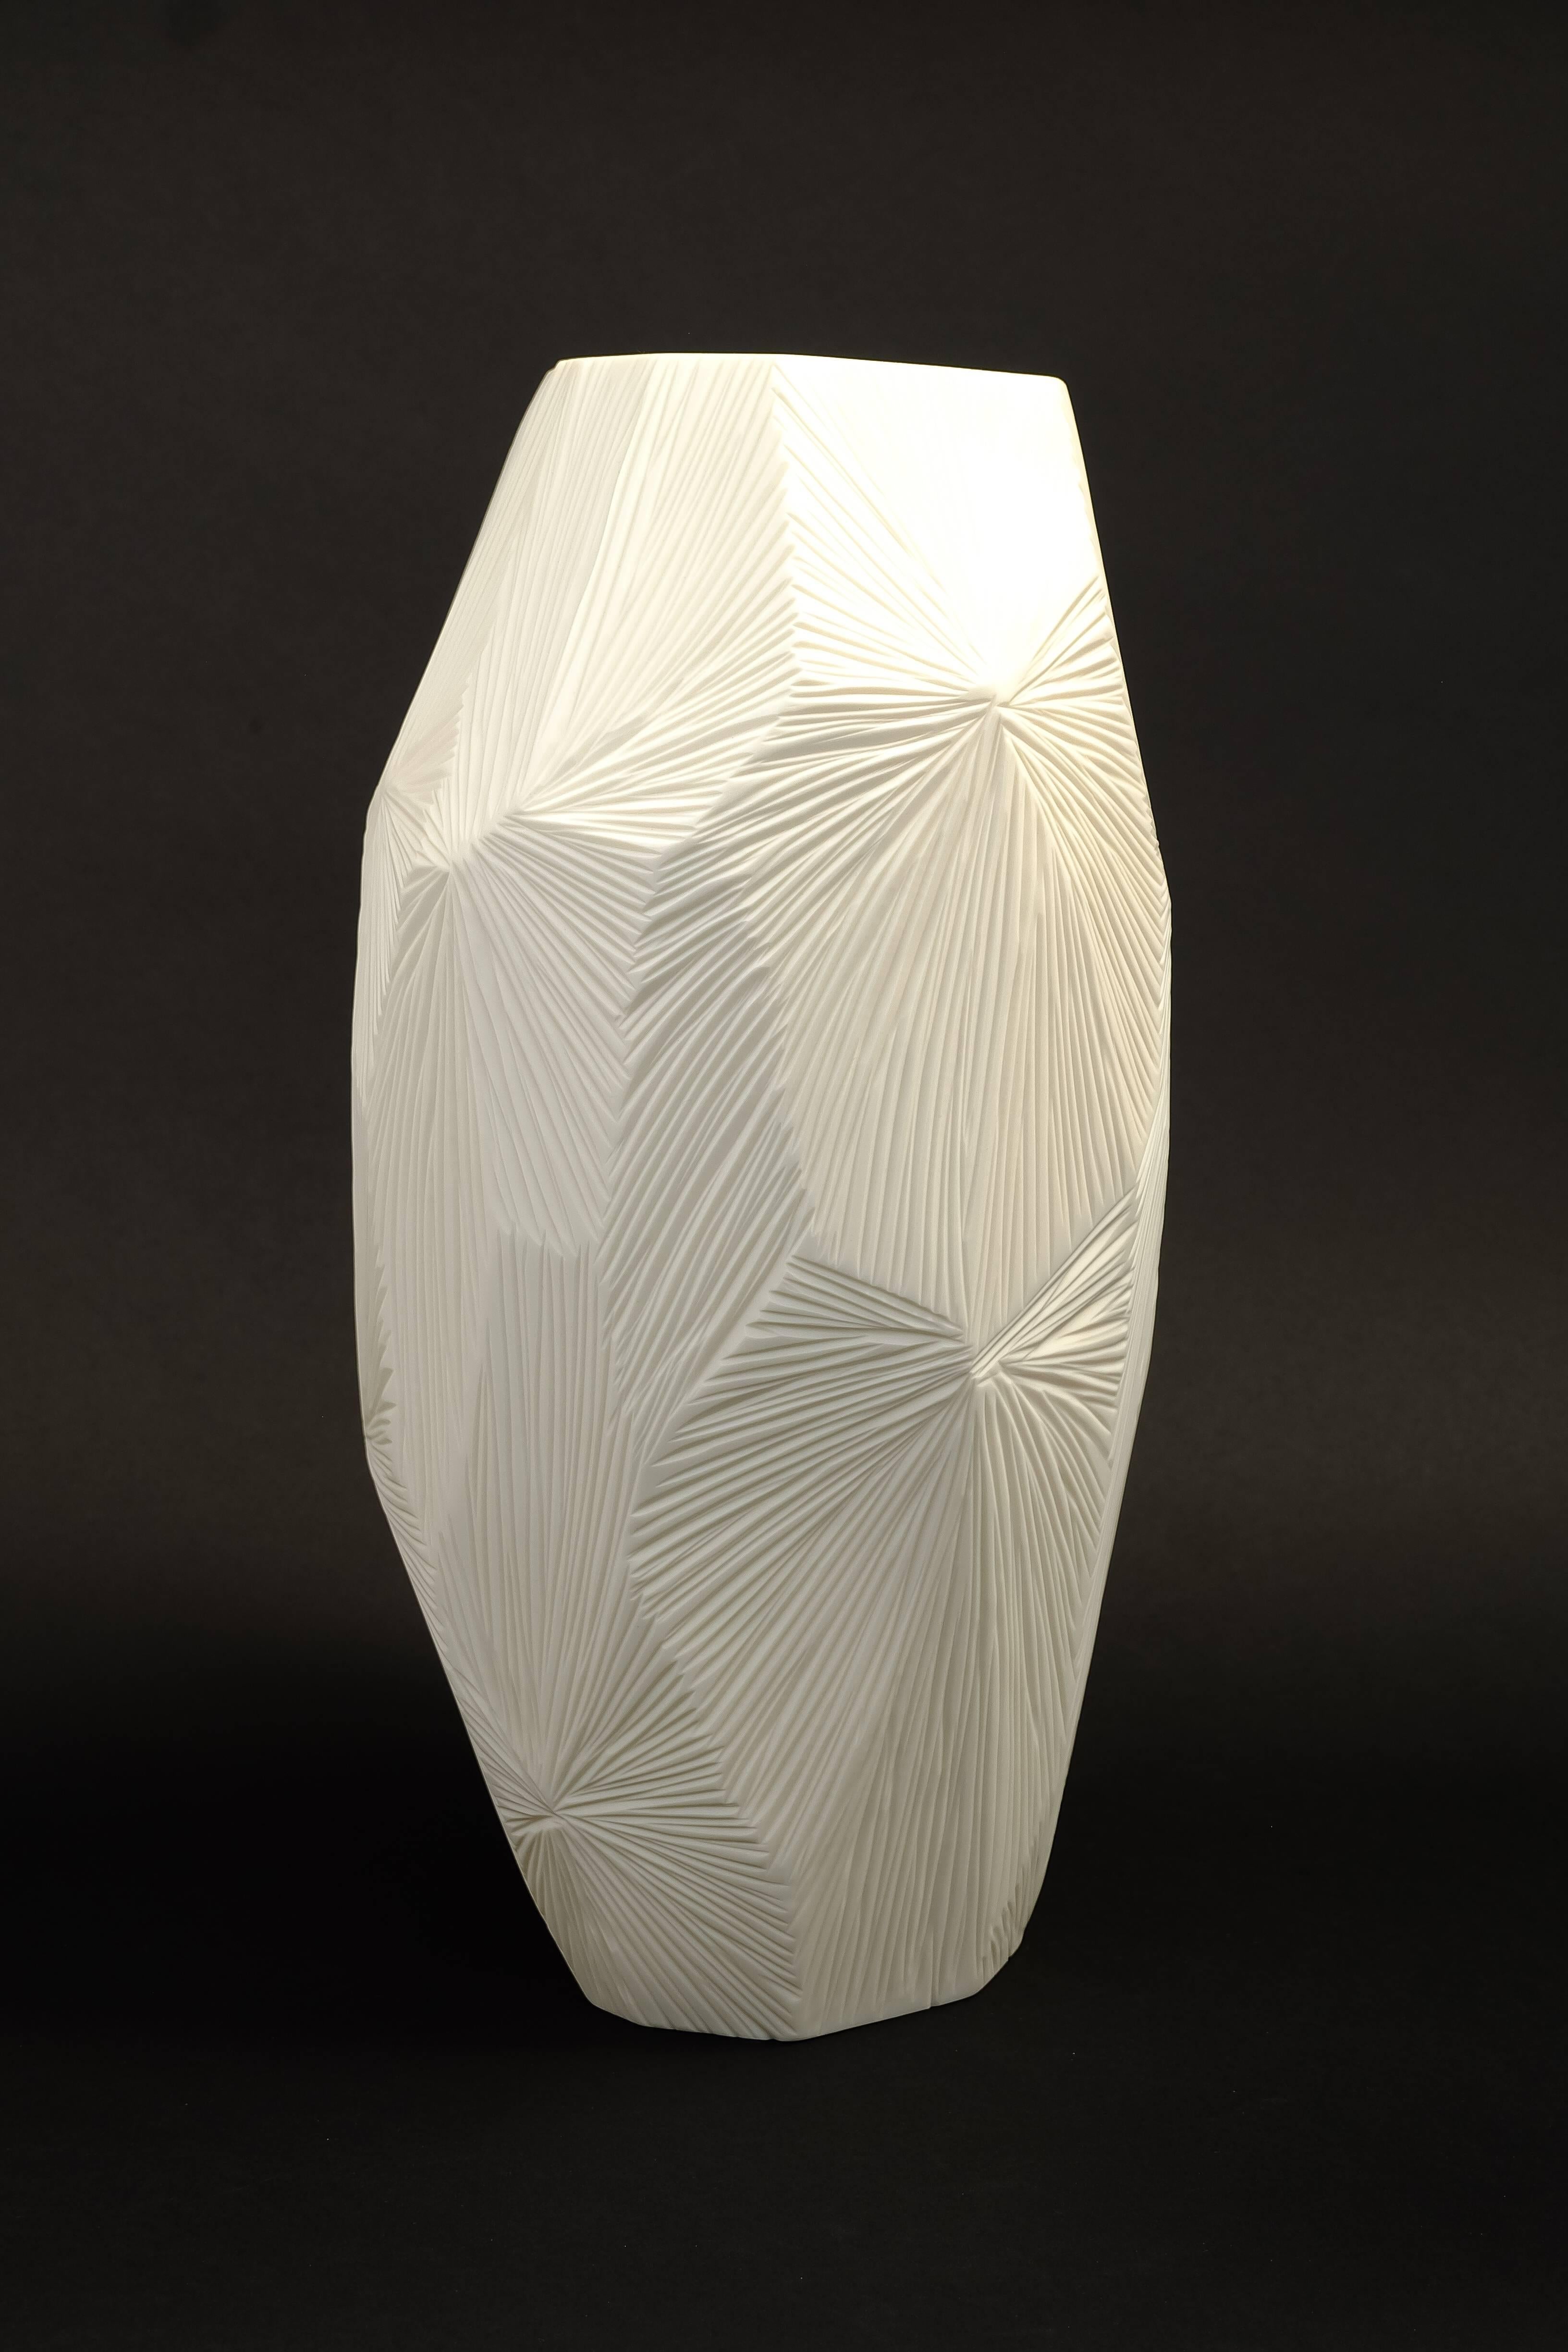 Large Vase from the Fragments series - Naturalistic Art by Vezzini & Chen